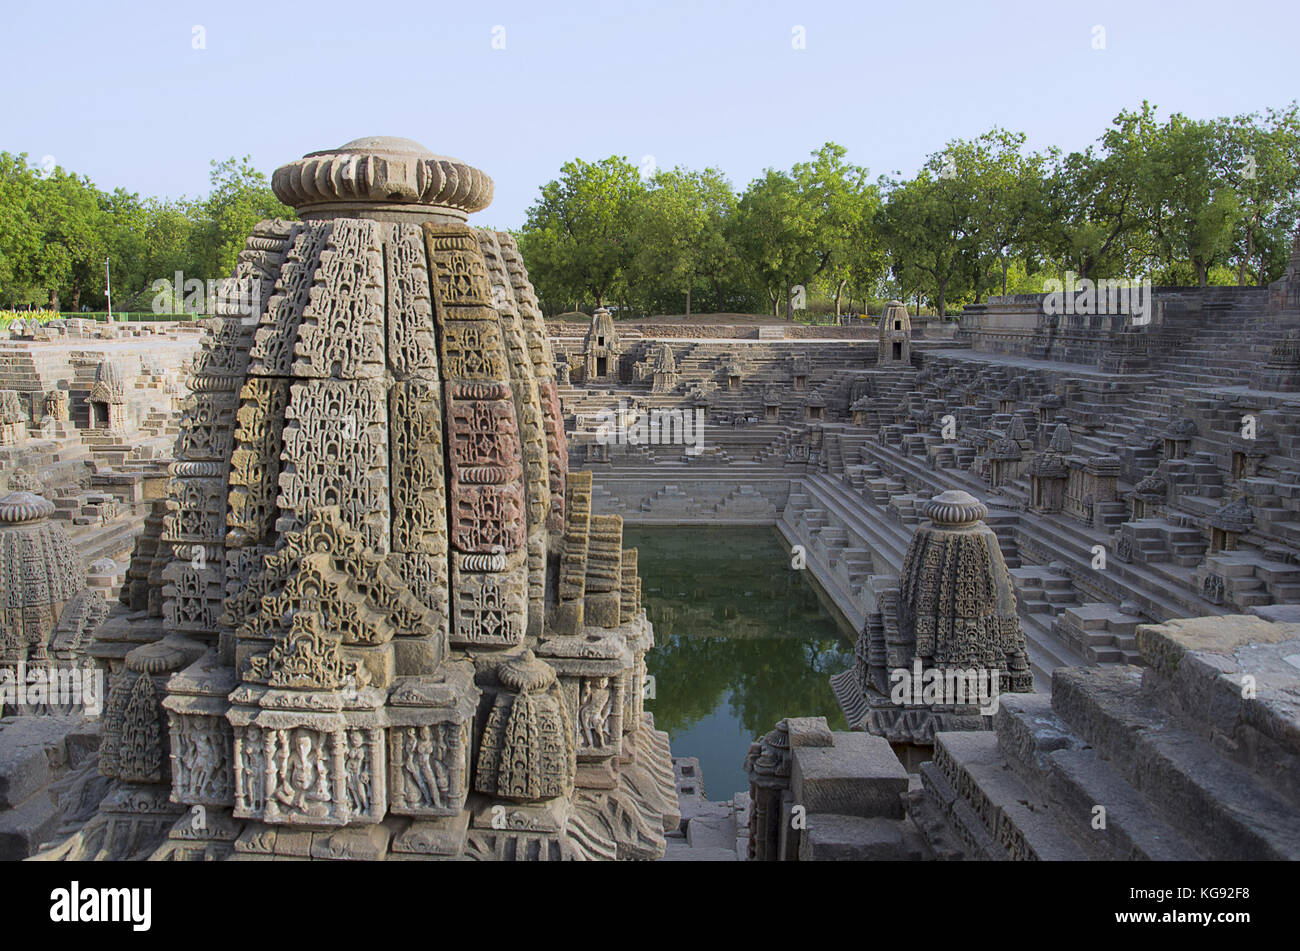 Small shrines and steps to reach the bottom of the reservoir, of the Sun Temple. Modhera village of Mehsana district, Gujarat, India Stock Photo